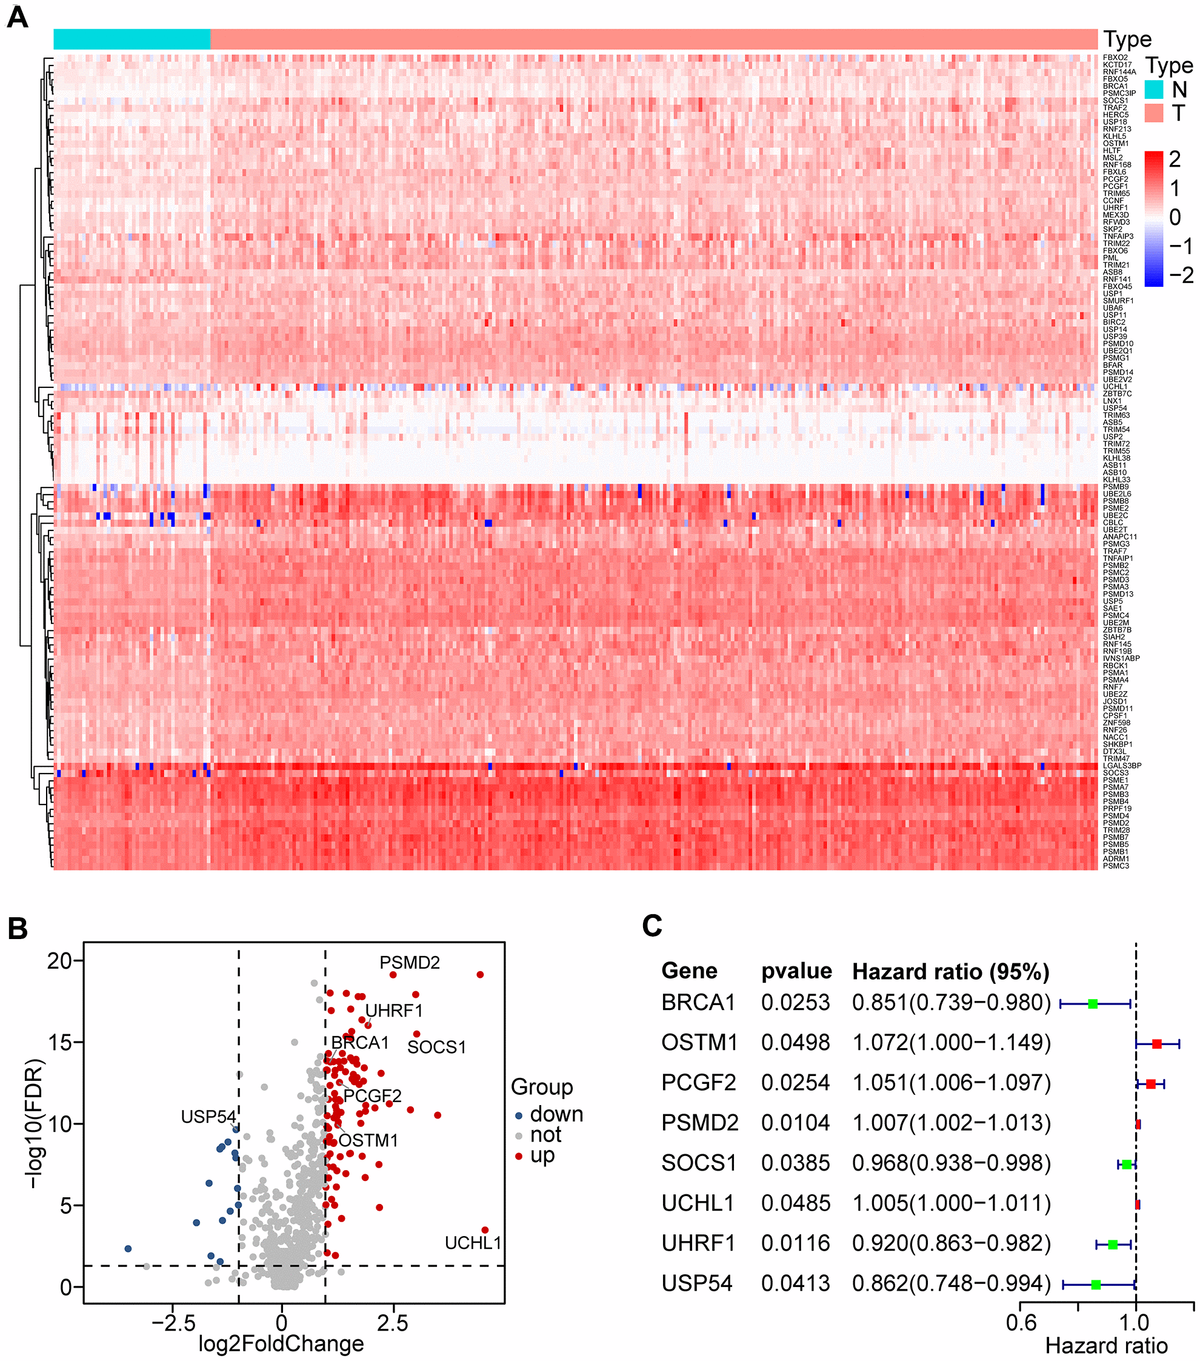 Differential expression of UPS-related genes (UPSGs) and identification of 8 UPSGs with prognostic value in HNSCC samples. (A) 114 differentially expressed UPSGs (DEUPSGs) are depicted as a heat map. (B) 97 upregulated and 17 downregulated DEUPSGs are shown as a volcano plot (FDR  1.5). (C) The eight risk DEUPSGs in the prognostic risk model are shown using a forest plot.